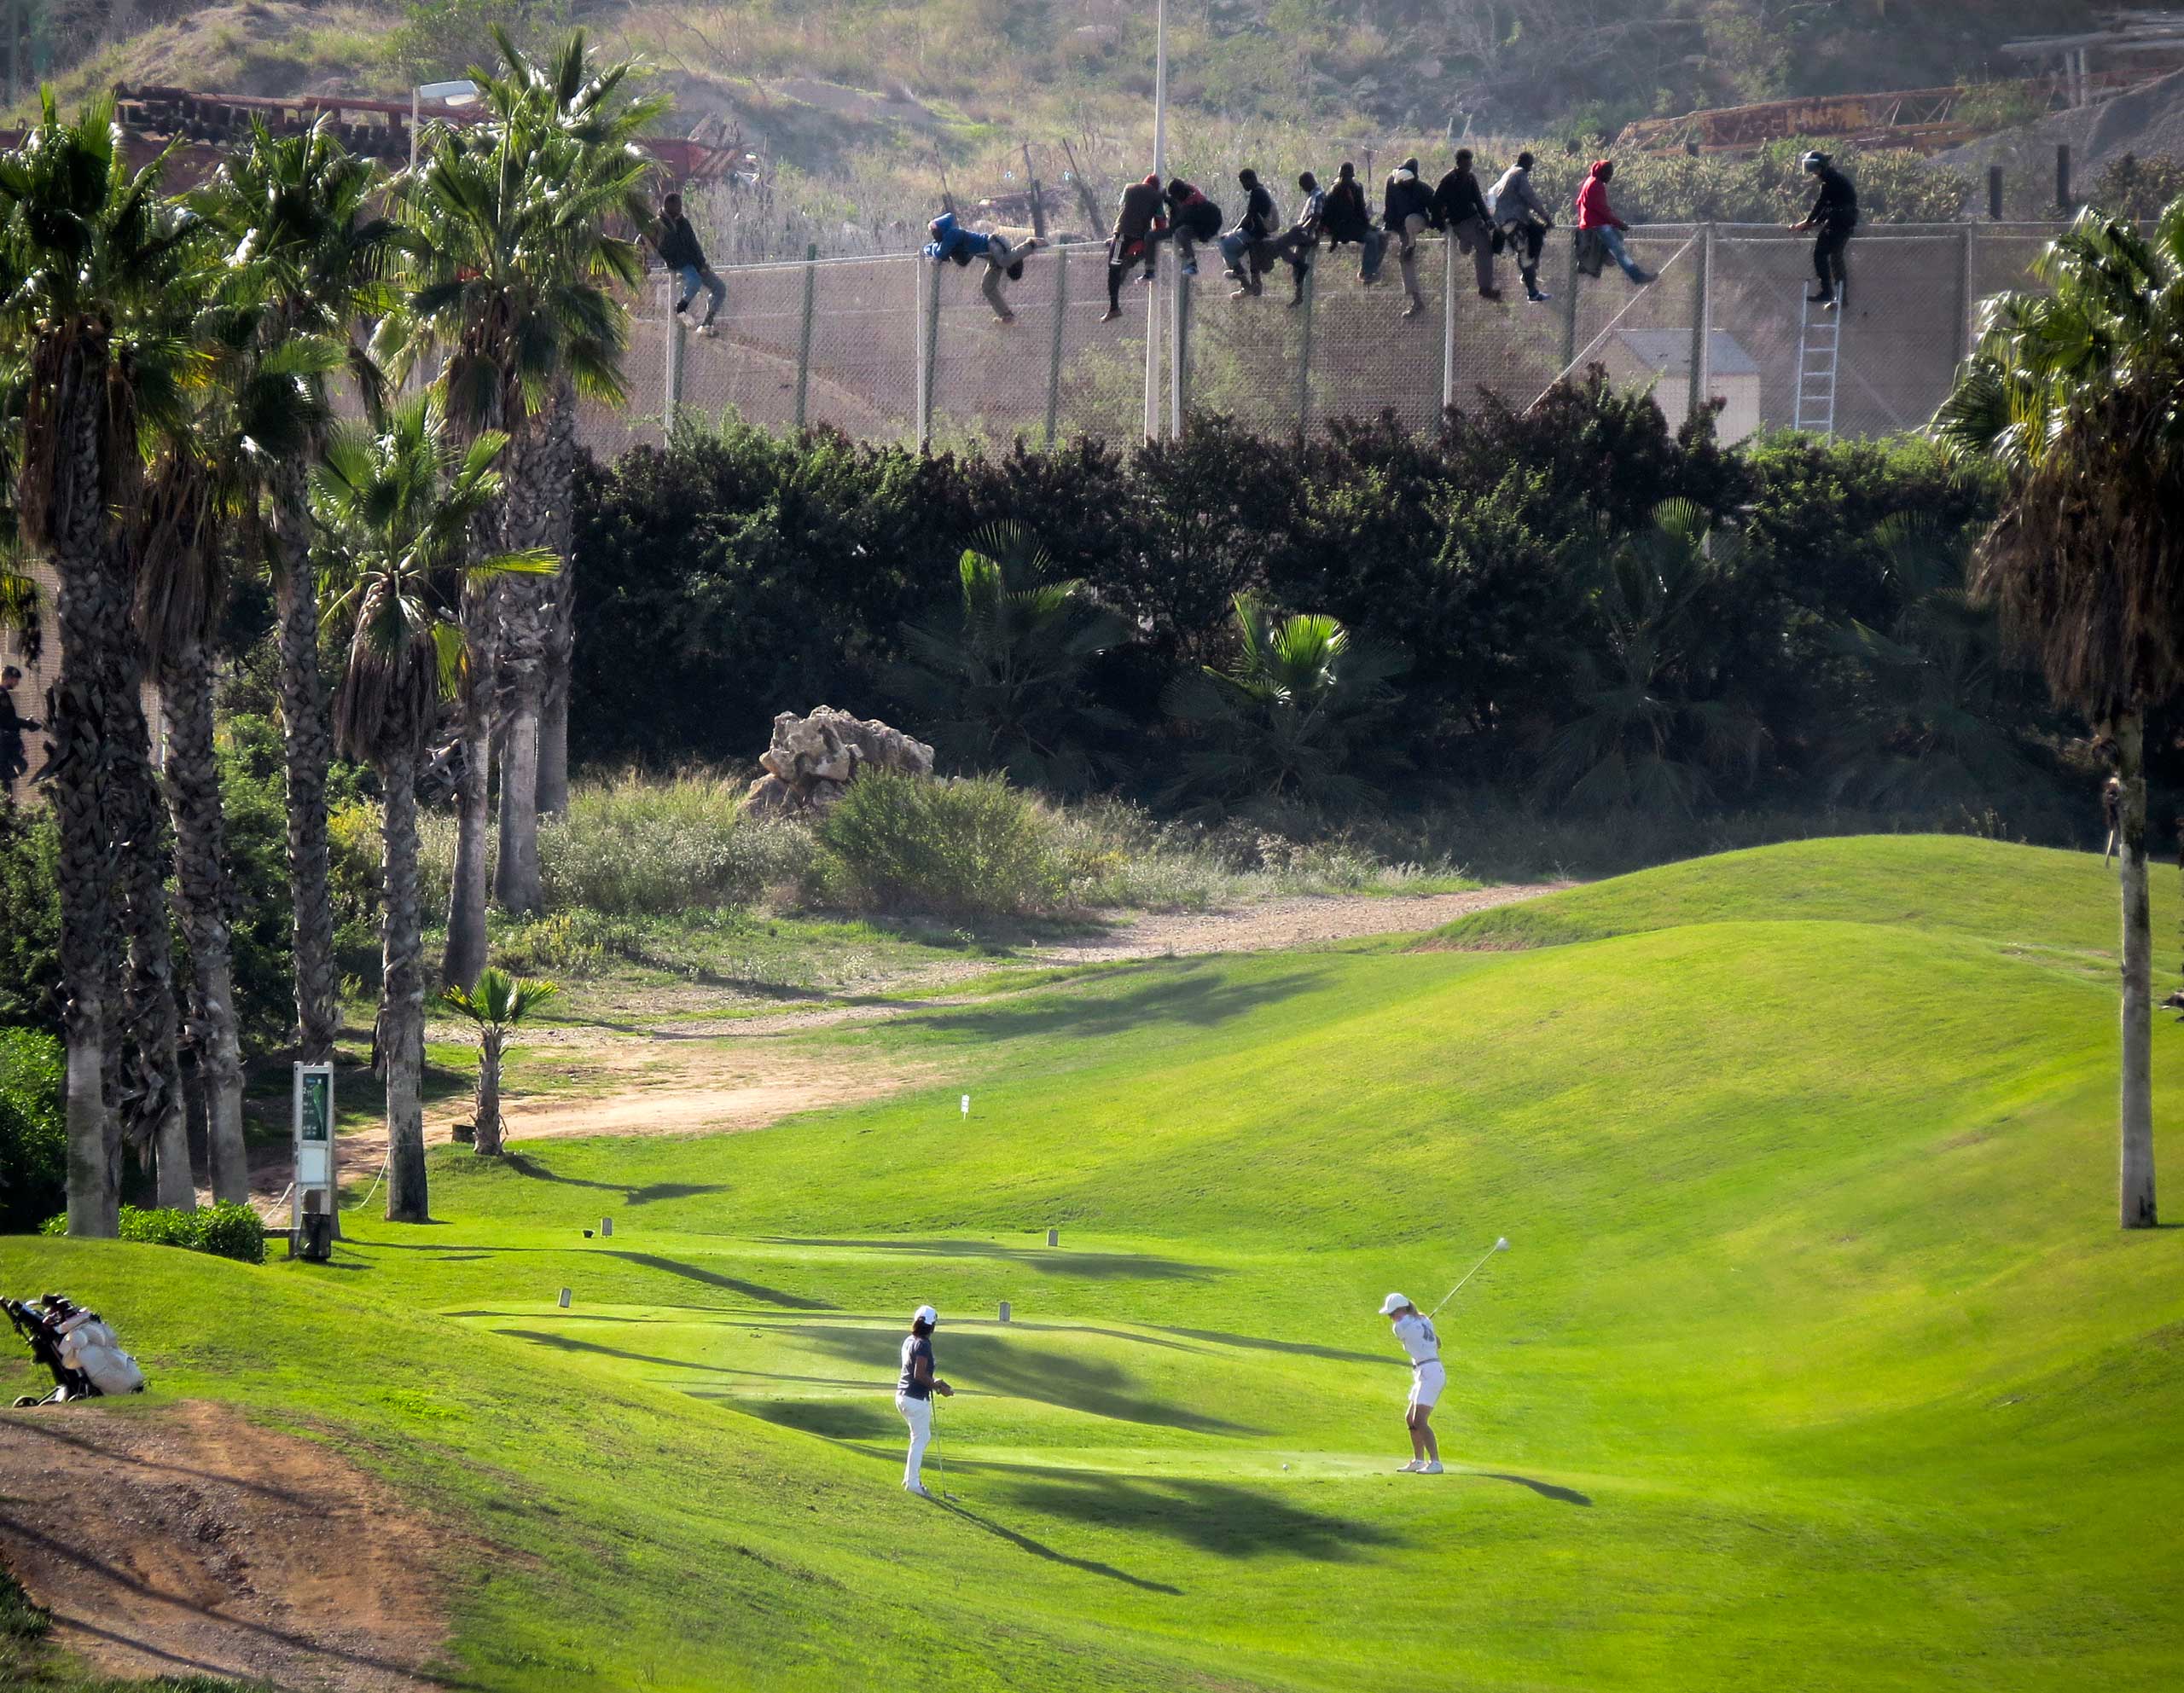 A golfer hits a tee shot as African migrants sit atop a border fence during an attempt to cross into Spanish territories between Morocco and Spain's north African enclave of Melilla, Oct. 22, 2014.